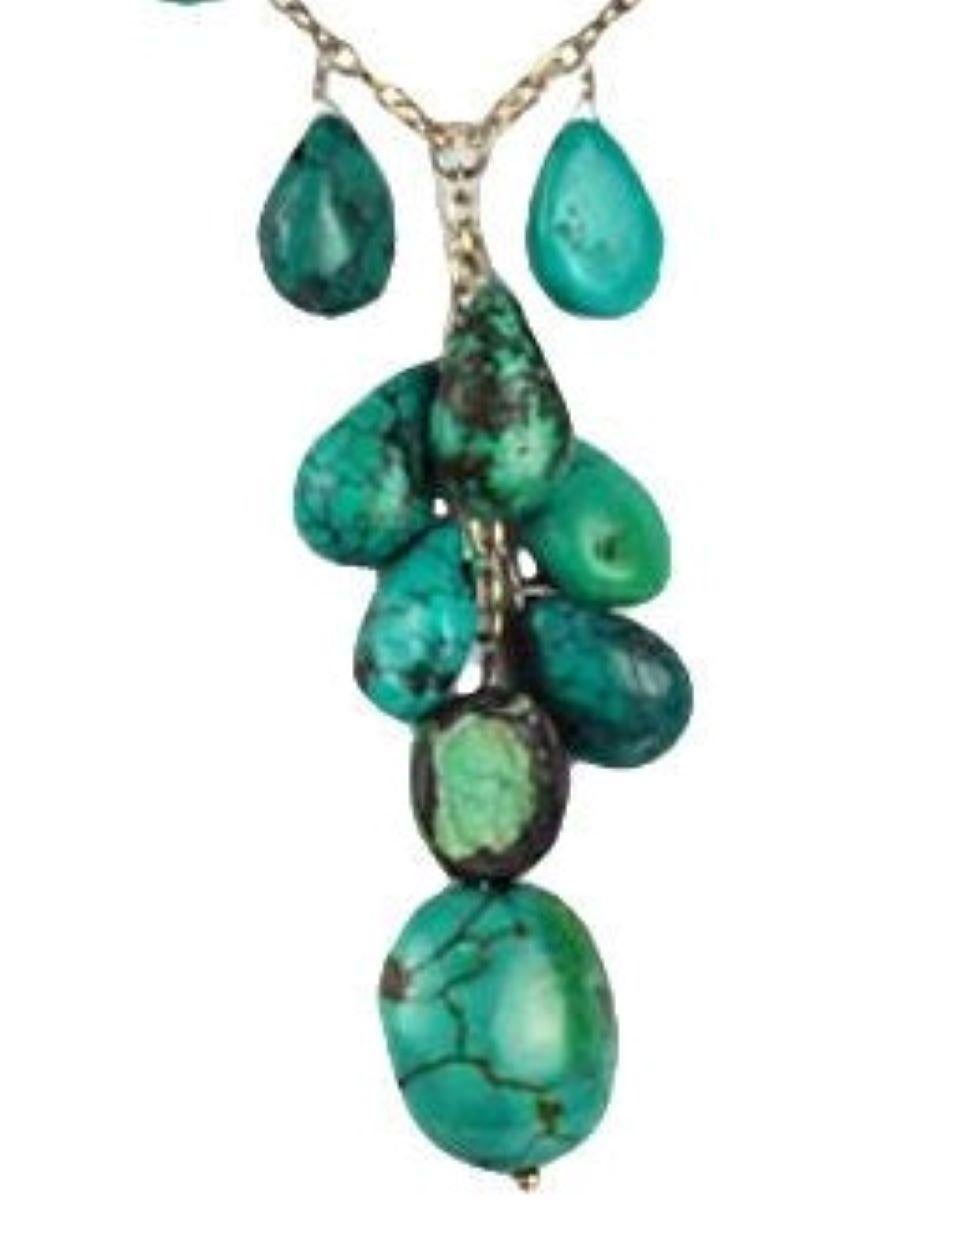 Stylish Genuine Turquoise and Sterling Silver ‘Y’ Necklace comprising Multi-Shaped Turquoise Beads and Sterling Silver Chain. Approx. length: 24” including 4” drop. More Beautiful in real time...A piece you’ll turn to time and time again! 
